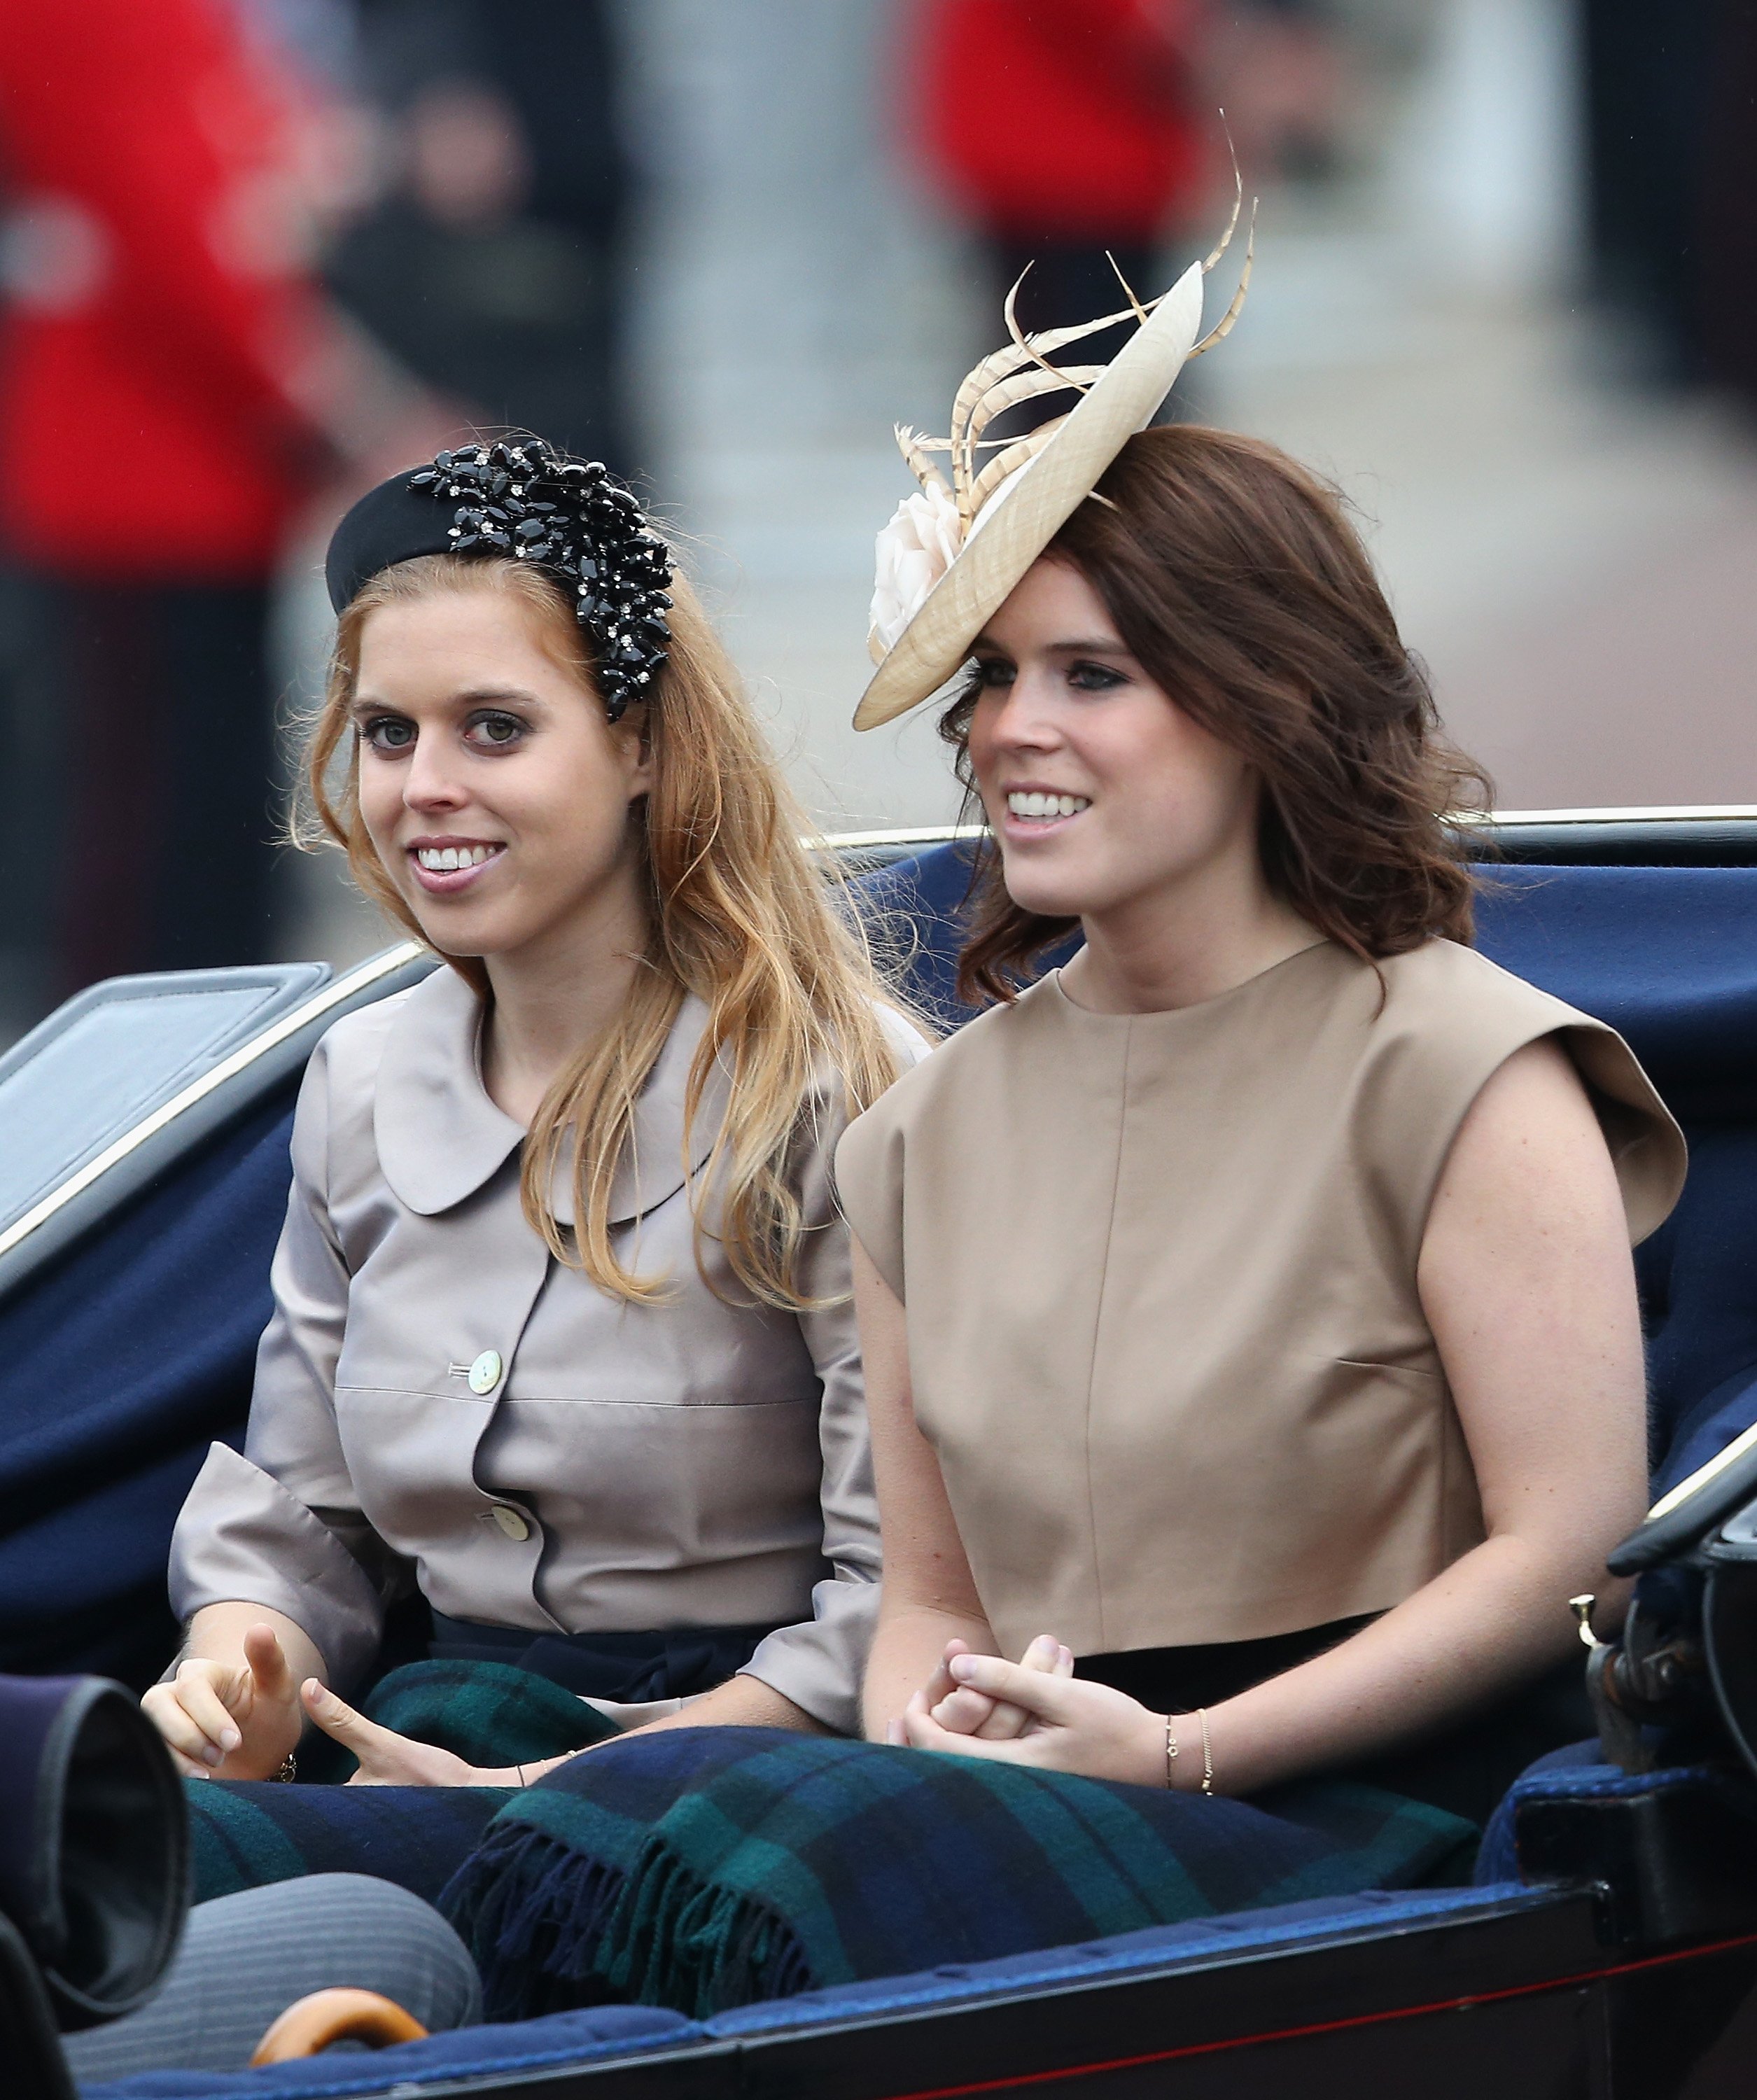 Princess Beatrice and Princess Eugenie during Trooping the Color on June 13, 2015 in London, England |  Source: Getty Images